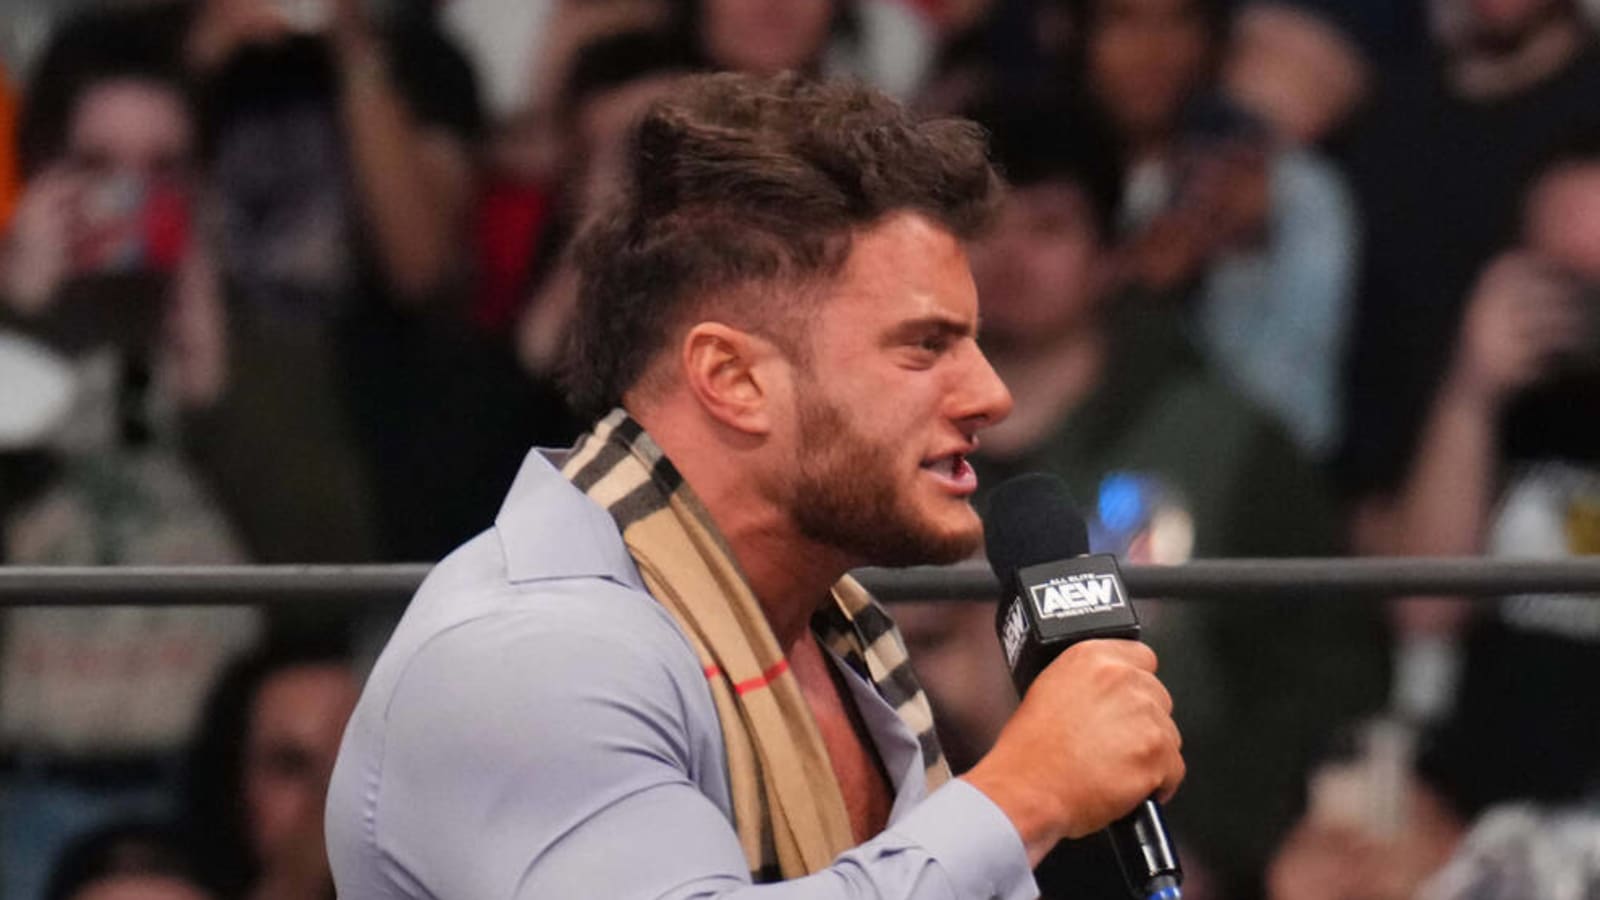 MJF names two rising AEW talents as the future of wrestling